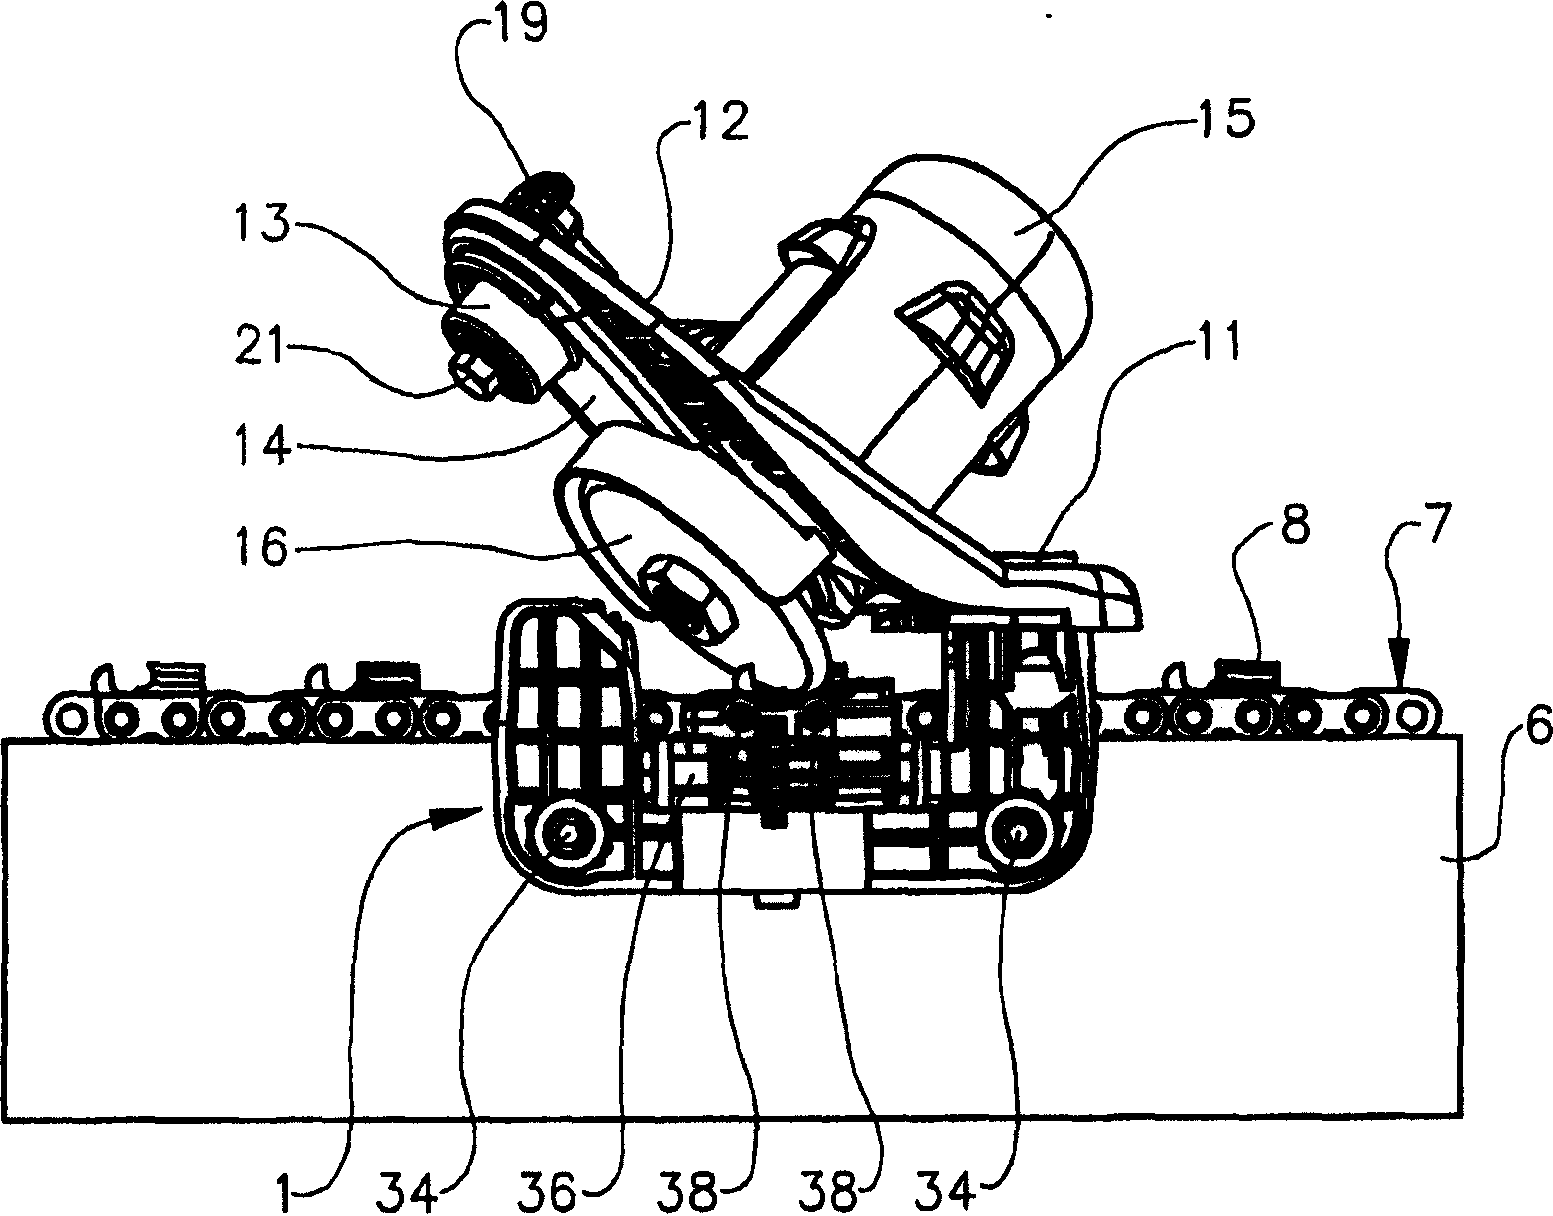 Device for sharpening chain saw teeth